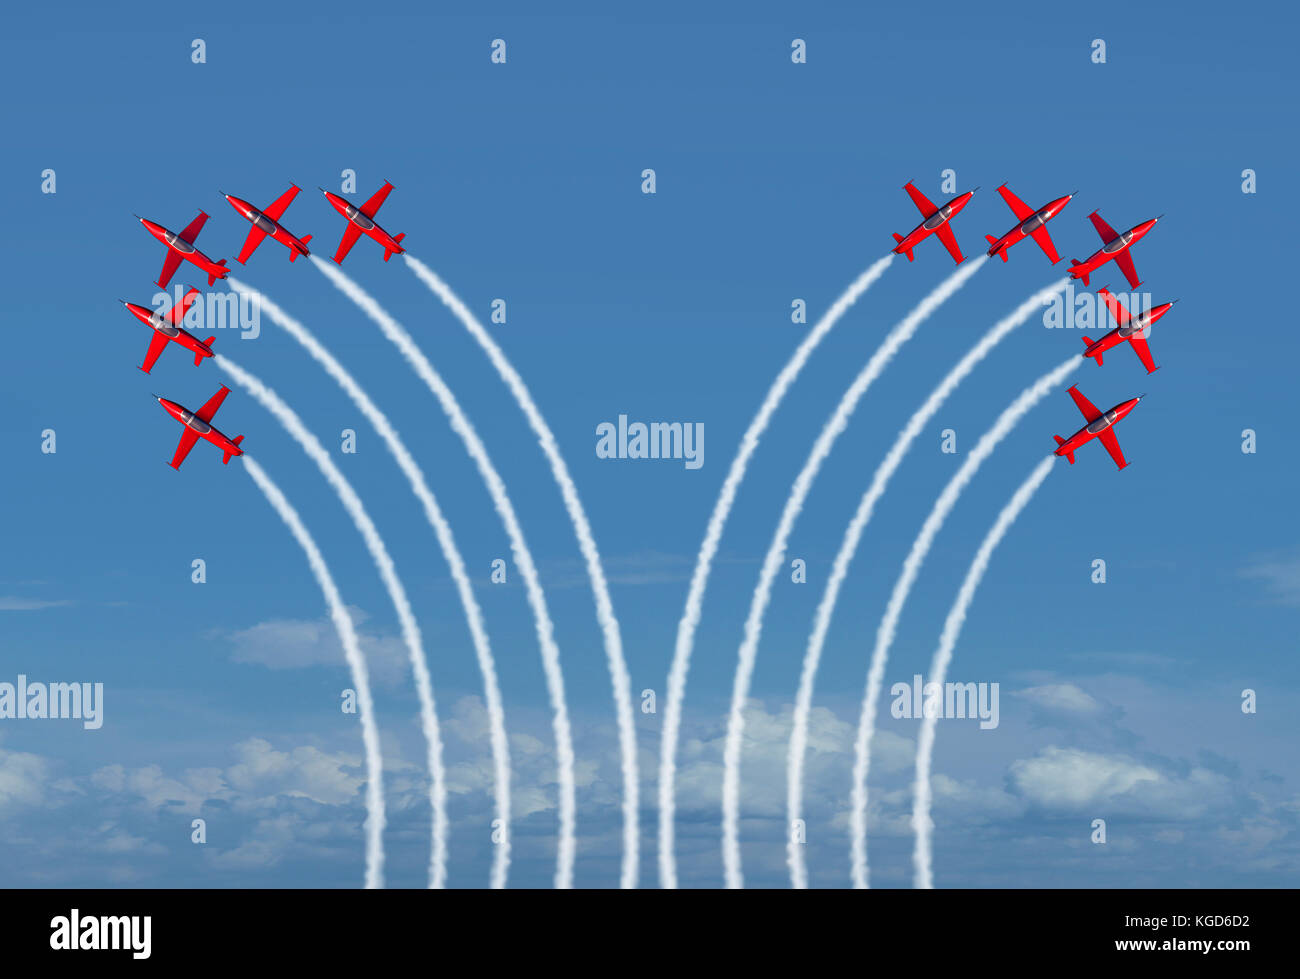 Divided group concept as a business metaphor for disagreement and parting ways as two groups of jet airplanes bending away. Stock Photo